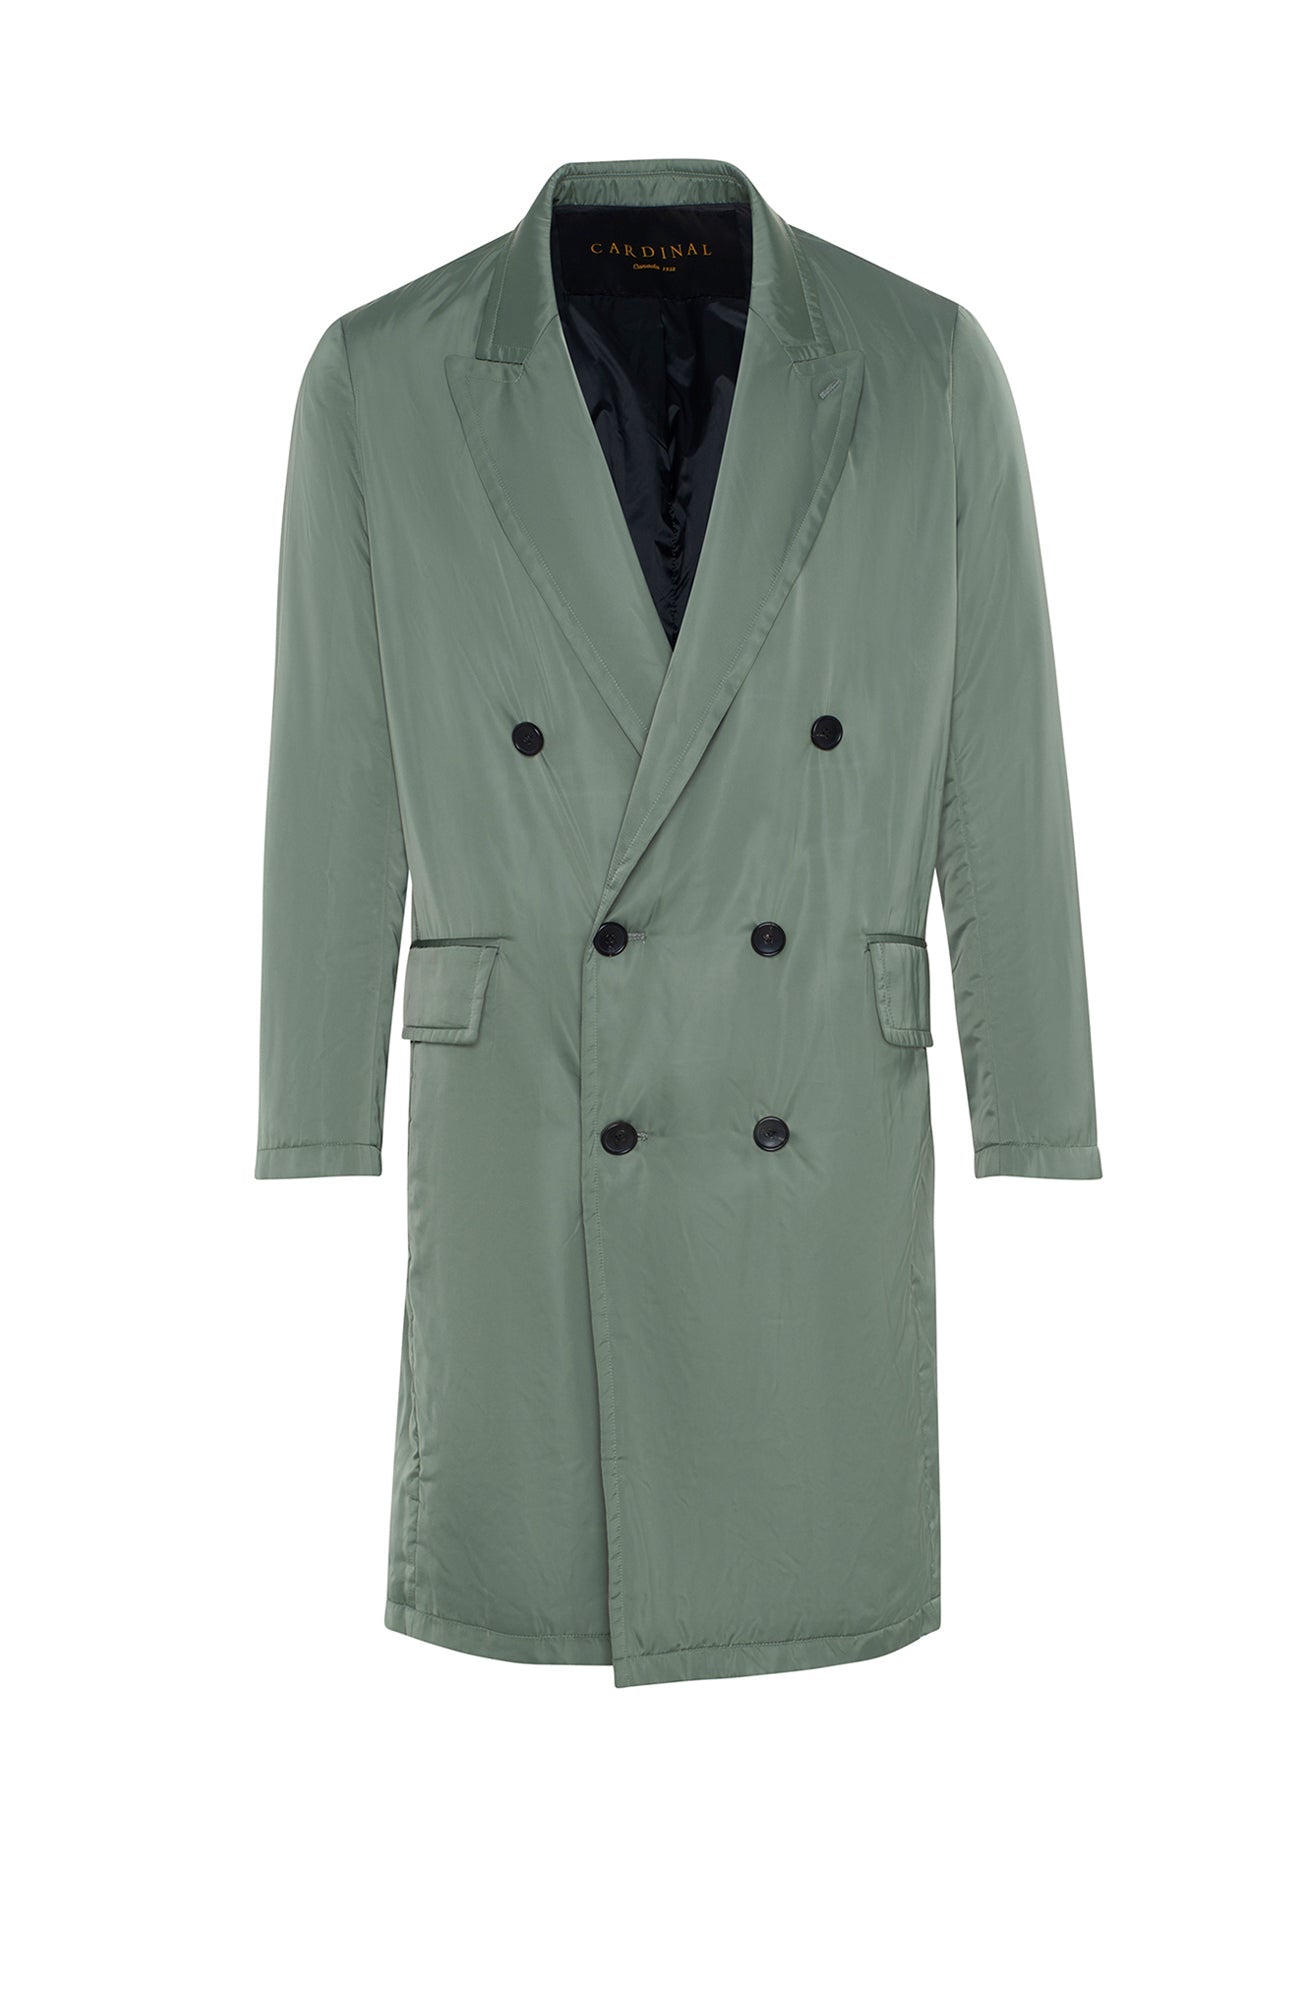 LIMITED EDITION: HUGH DOUBLE BREAST SAGE TOPCOAT - MENS - Cardinal of Canada-US-UGH SAGE DOUBLE BREAST TOPCOAT 41.5 INCH LENGTH